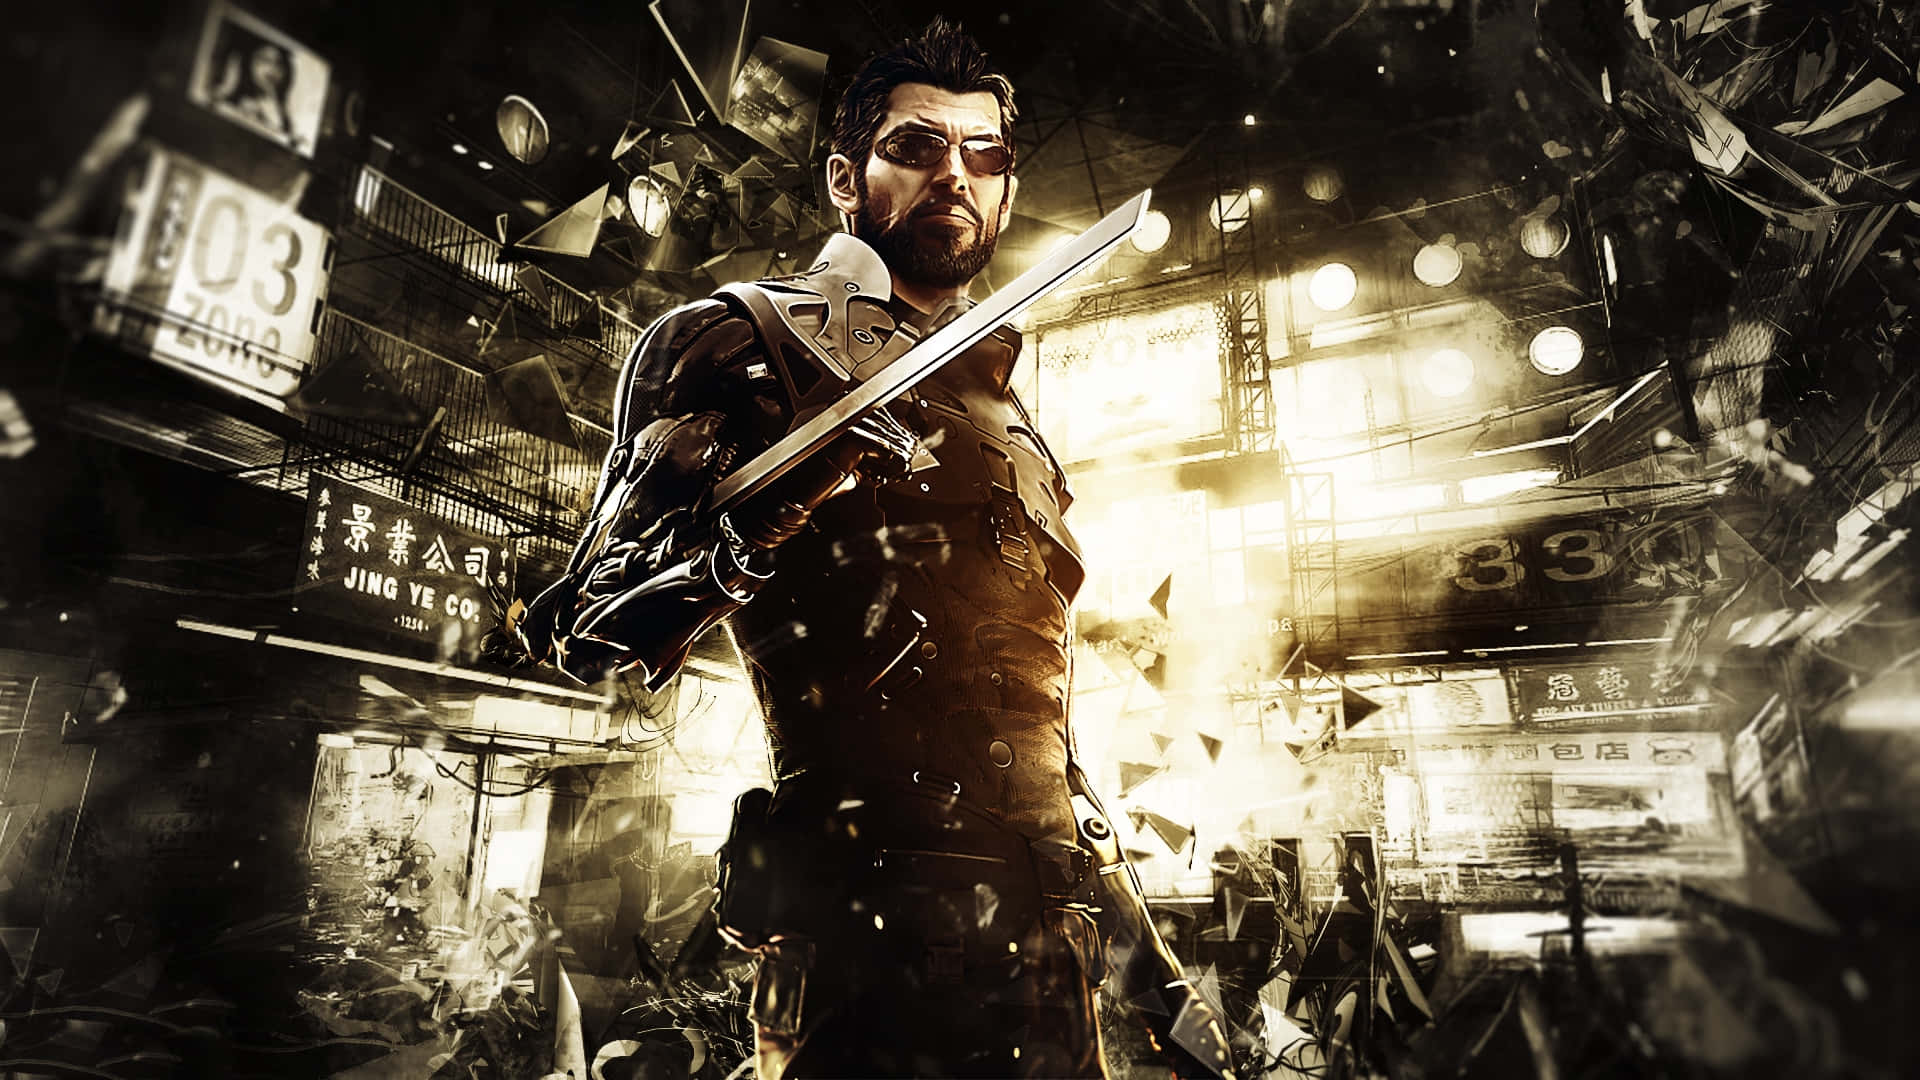 Explore the cyberpunk world of Mankind Divided Wallpaper